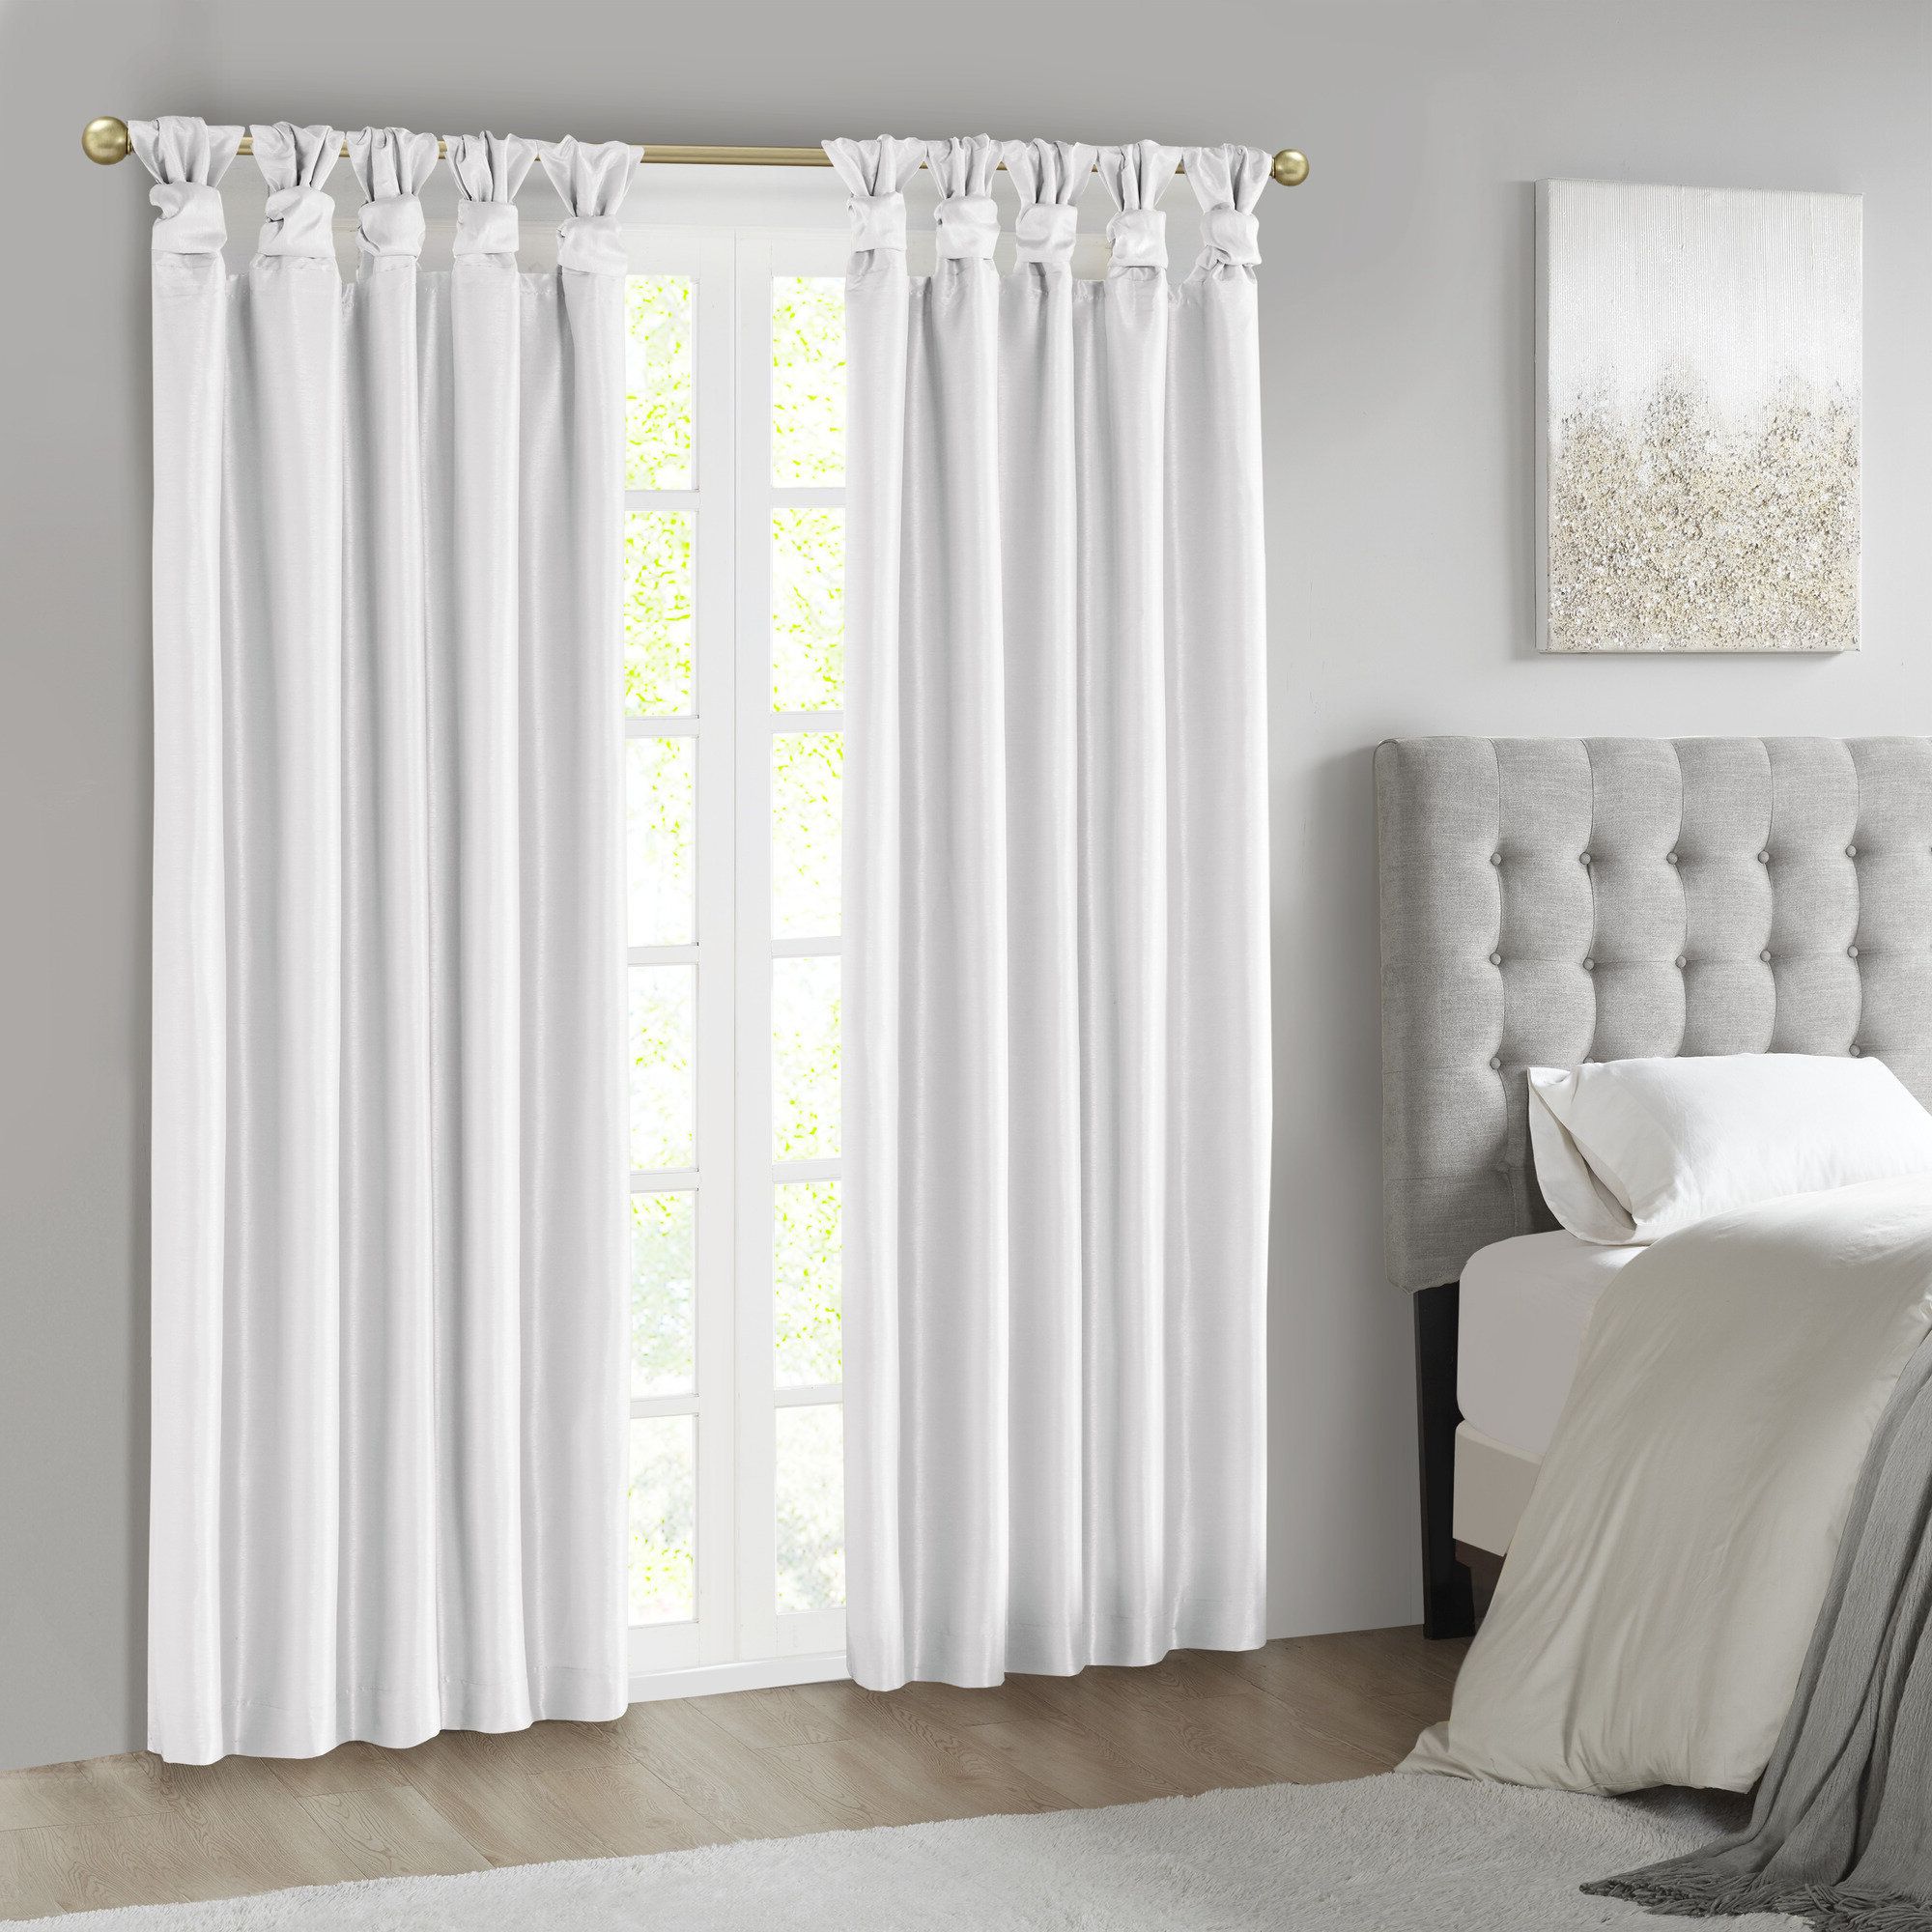 Campbelltown Solid Color Blackout Tab Top Single Curtain Panel Regarding Popular Knotted Tab Top Window Curtain Panel Pairs (View 17 of 20)